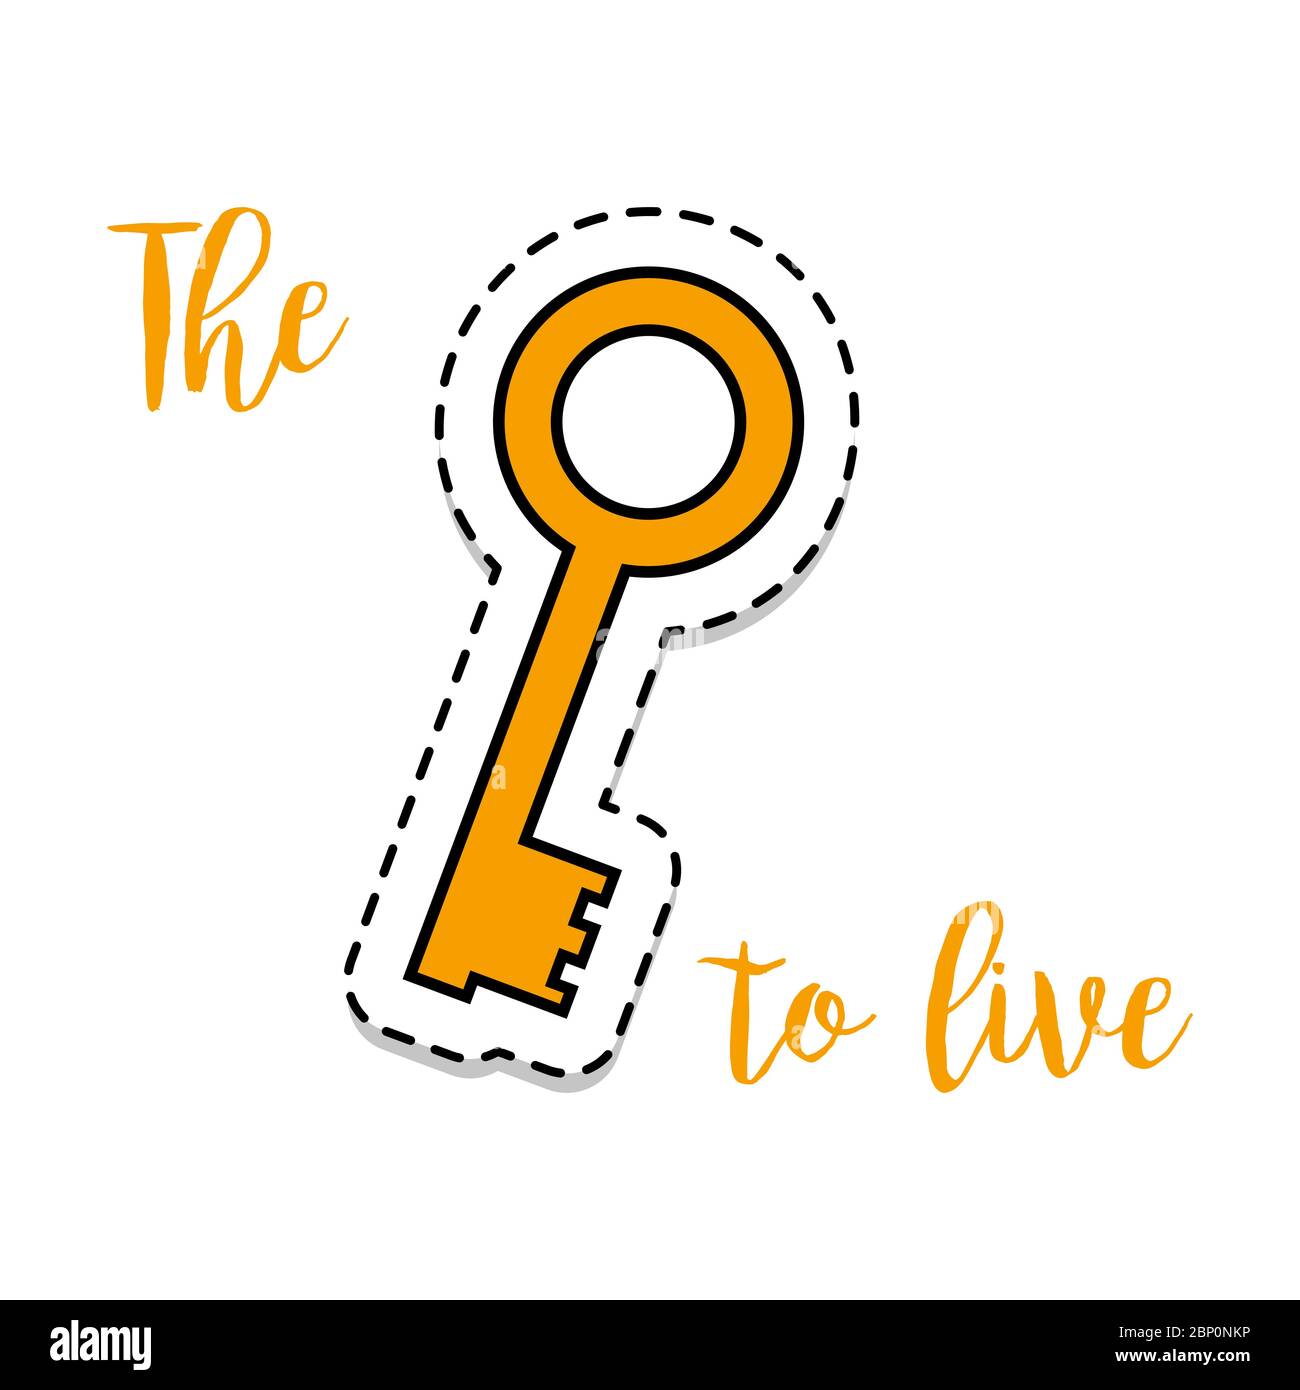 Fashion patch element with quote, The key to live, with key badge. Vector illustration Stock Vector